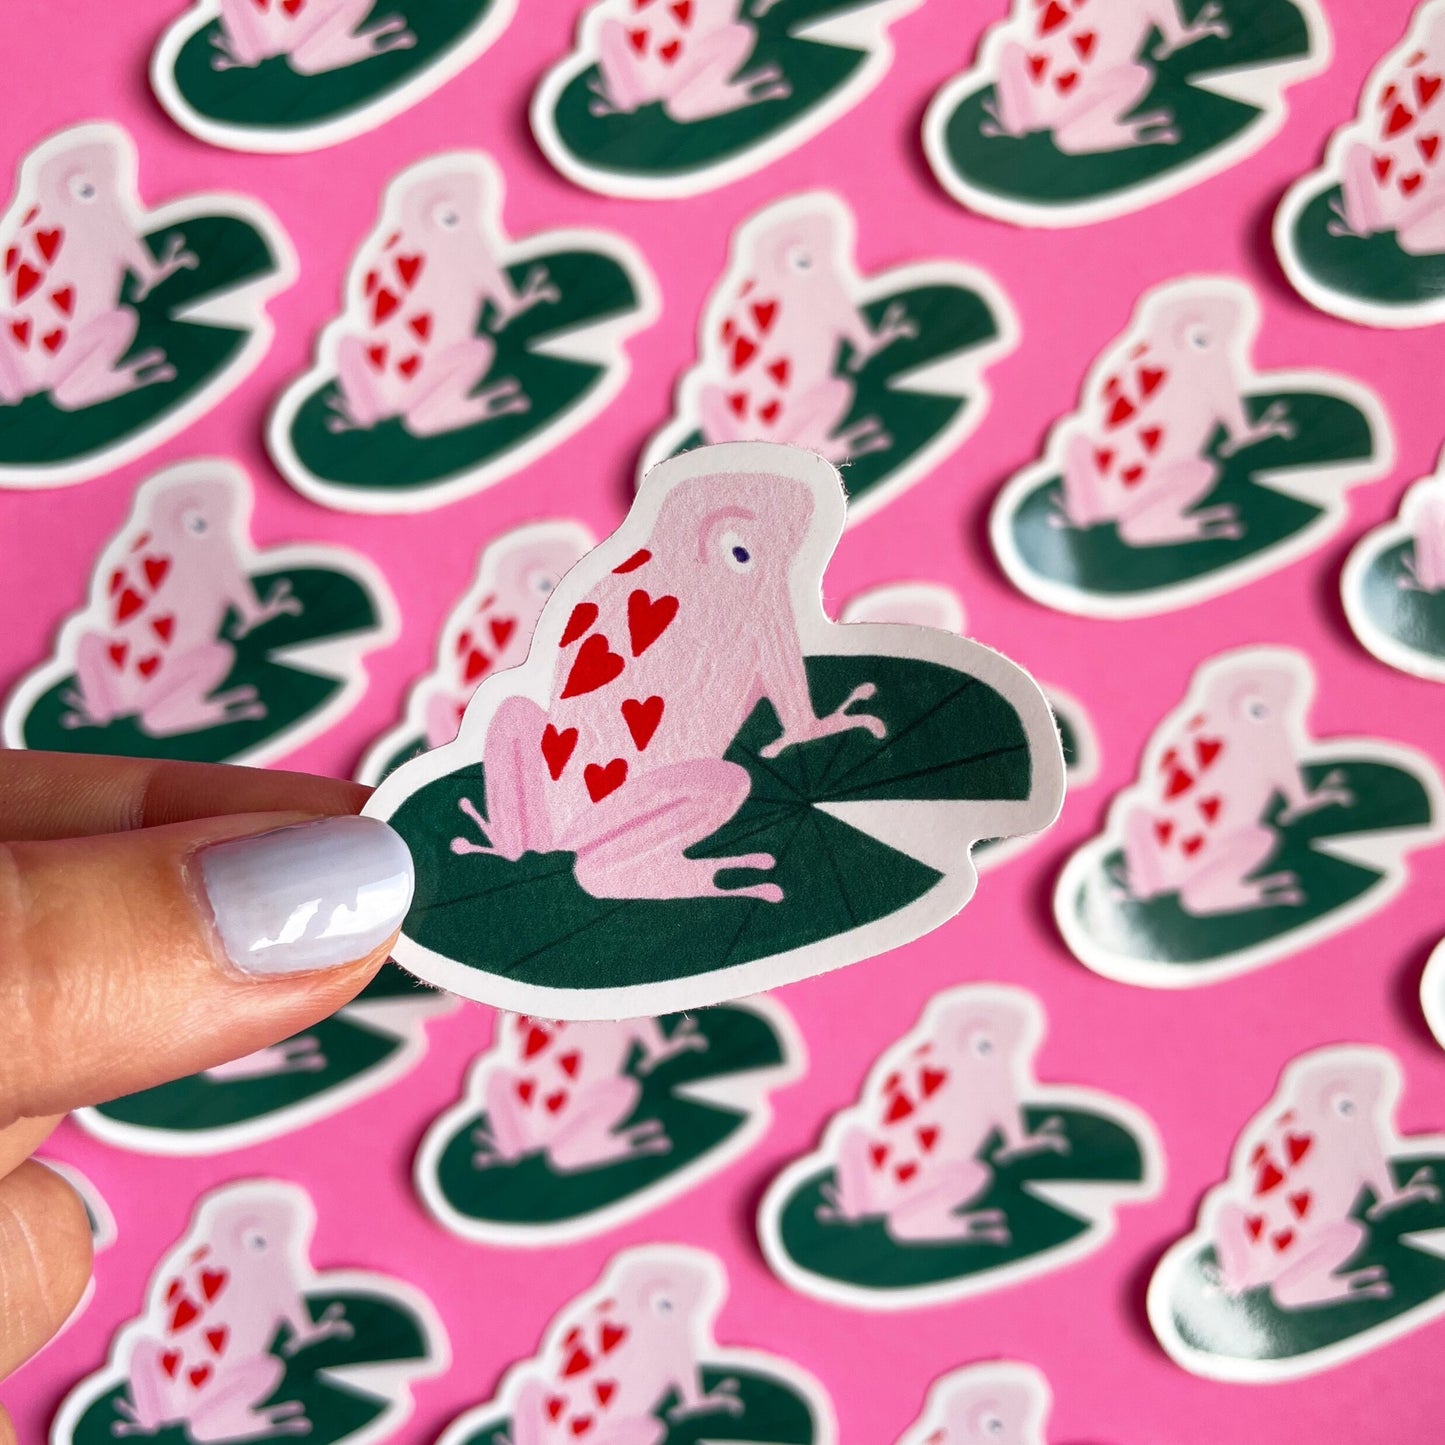 small vinyl sticker with a pink frog with hearts on it sitting on a dark green lily pad 